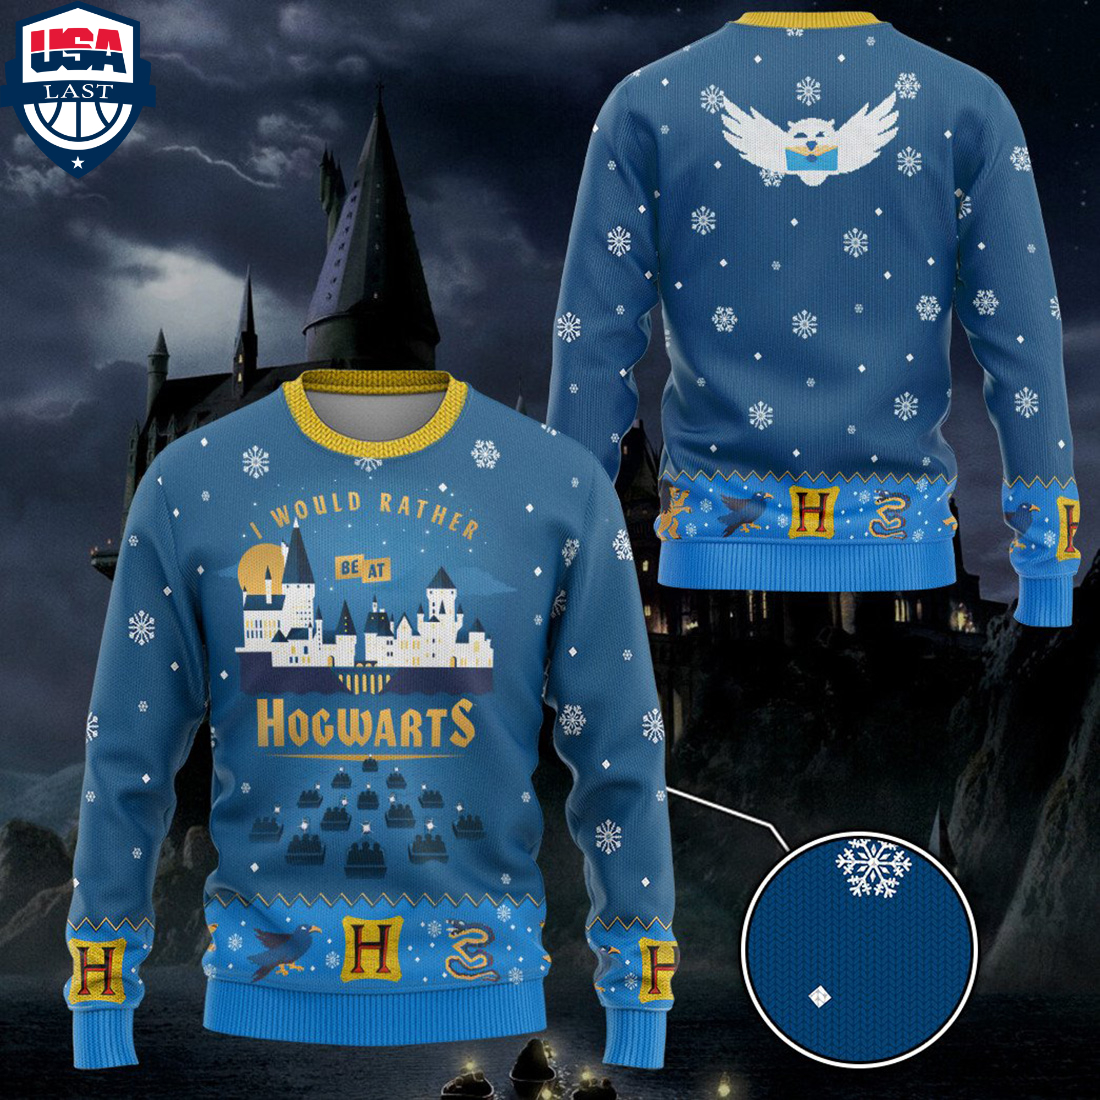 Harry-Potter-I-would-rather-be-at-Hogwarts-ugly-christmas-custom-ugly-sweater